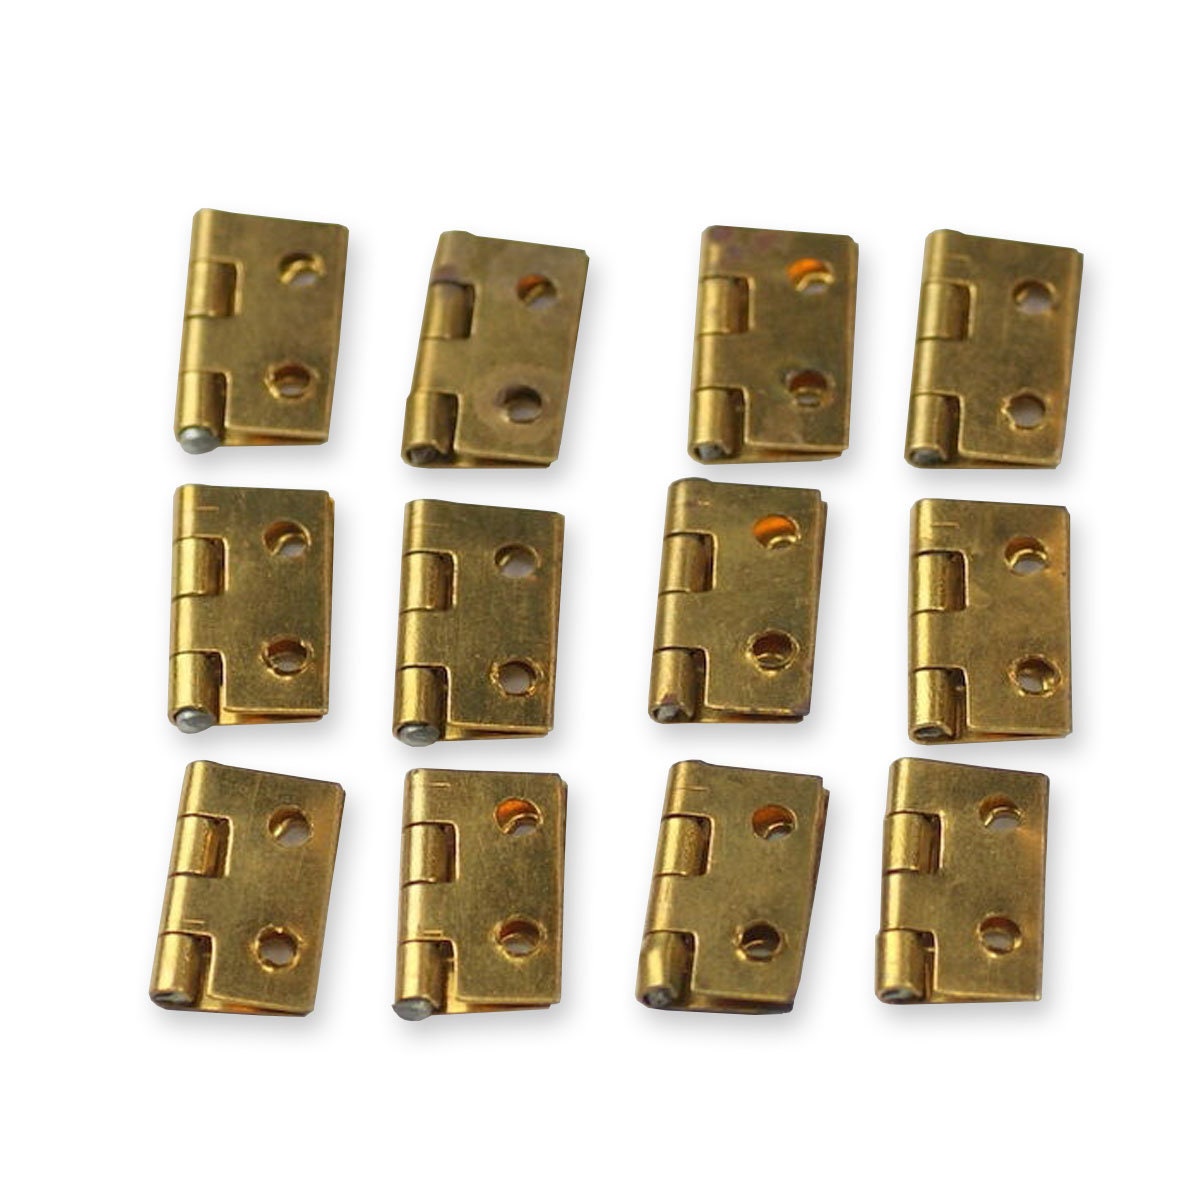 12x Small BRASS HINGES Clock Case Repairs Parts Clockmakers Other Uses 